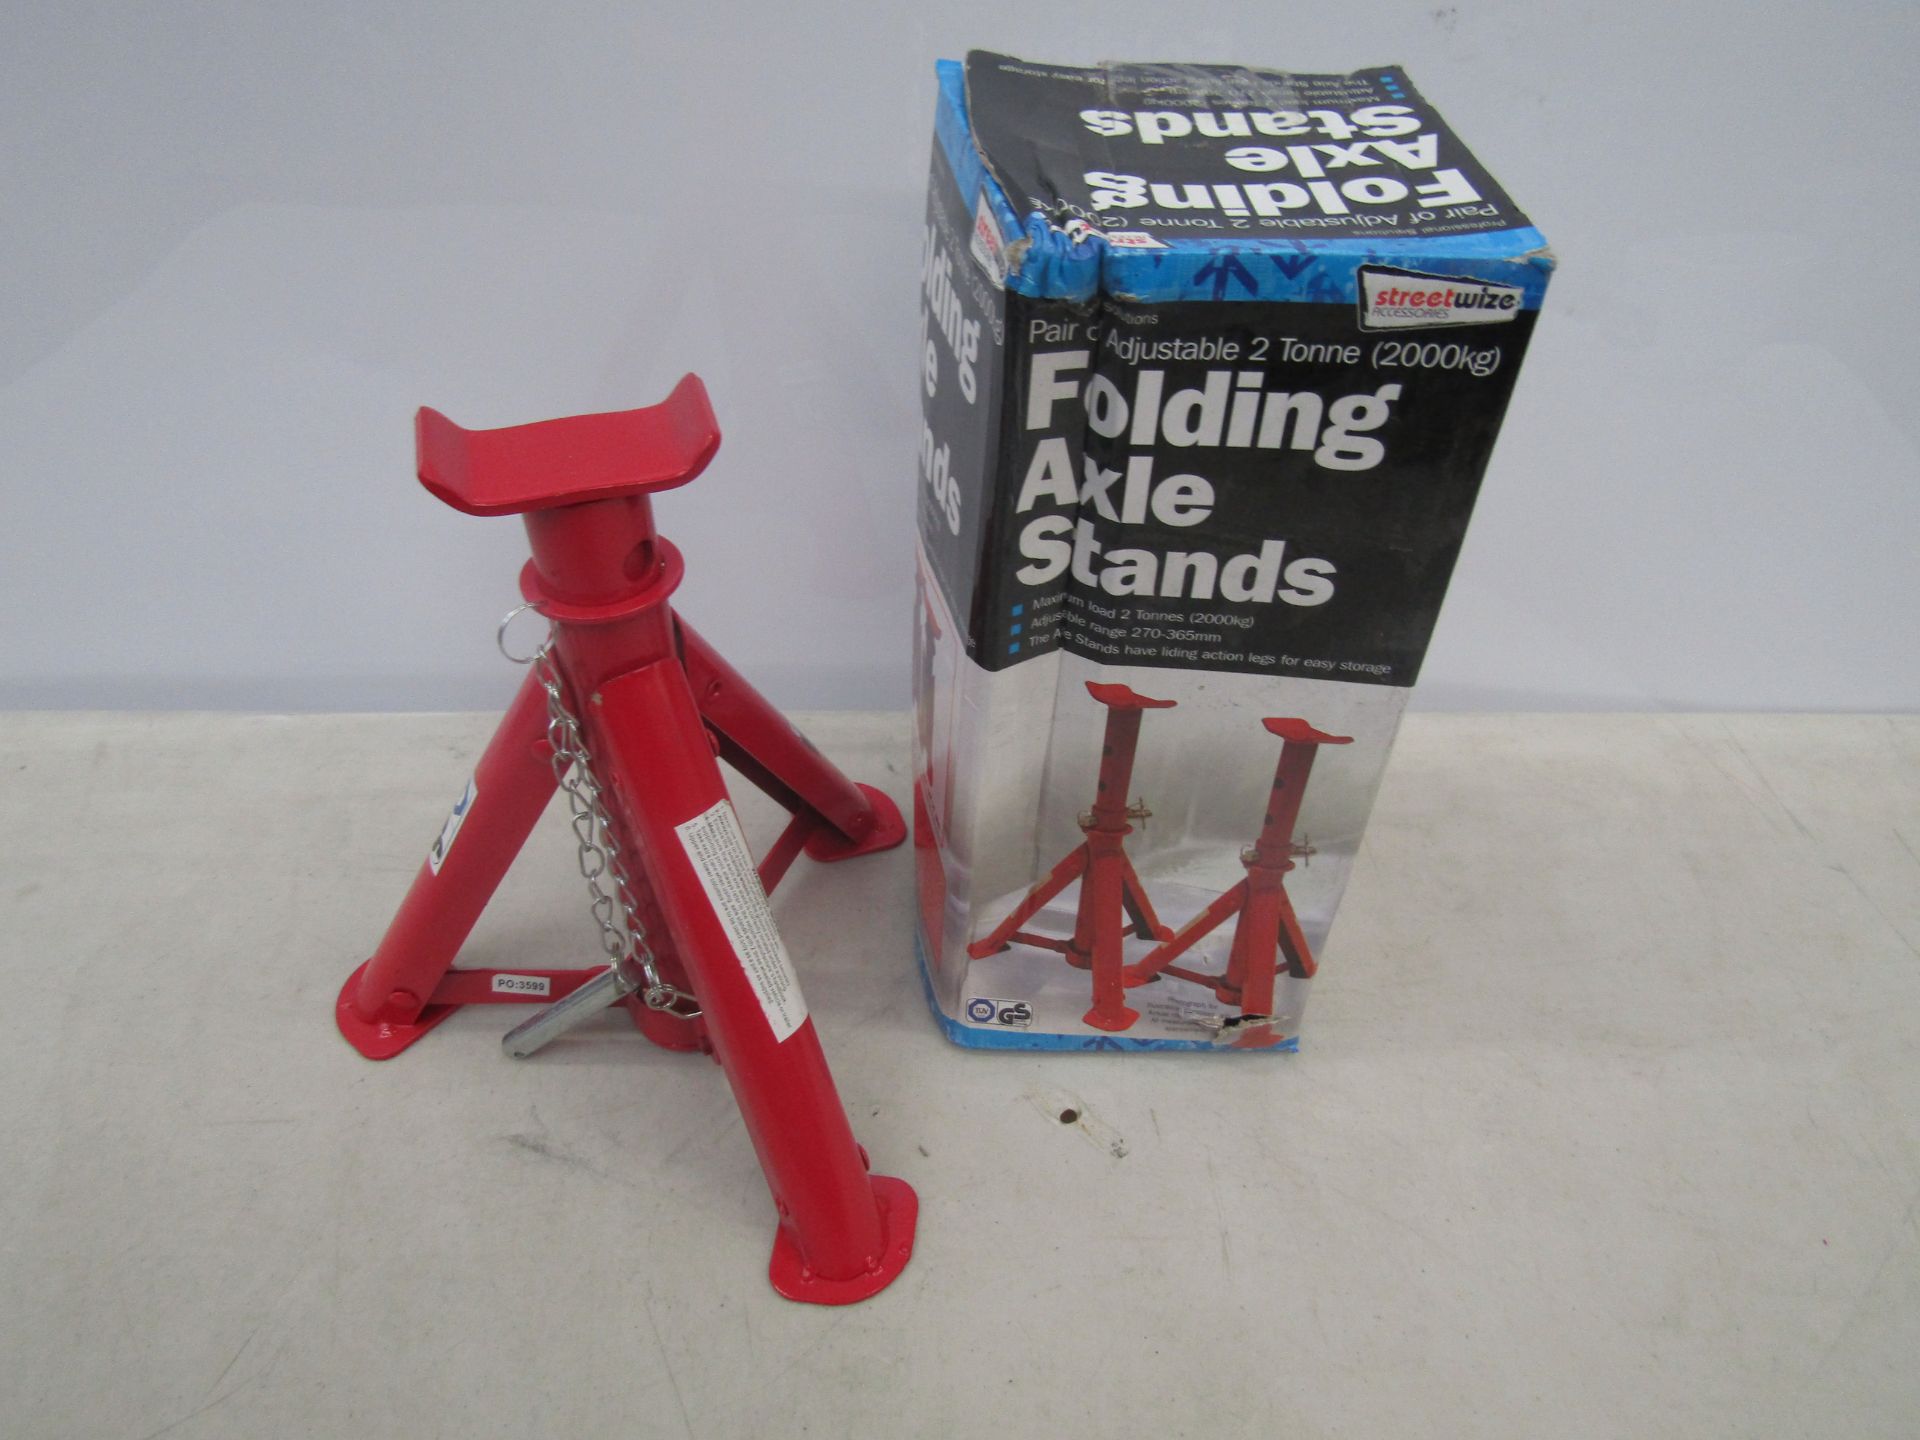 Pair of 2 tonne folding axle stands, unused and boxed.